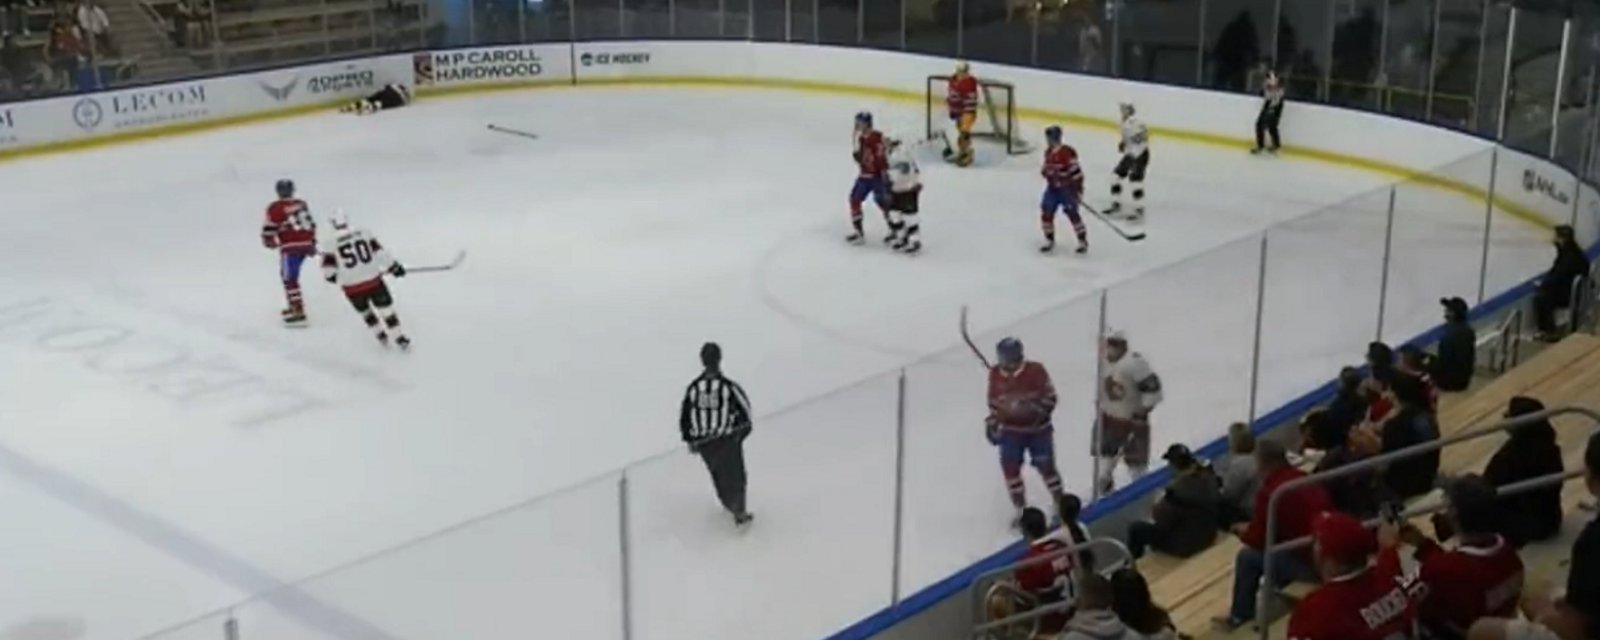 Late hit leads to injury during Habs/Sens prospect game.